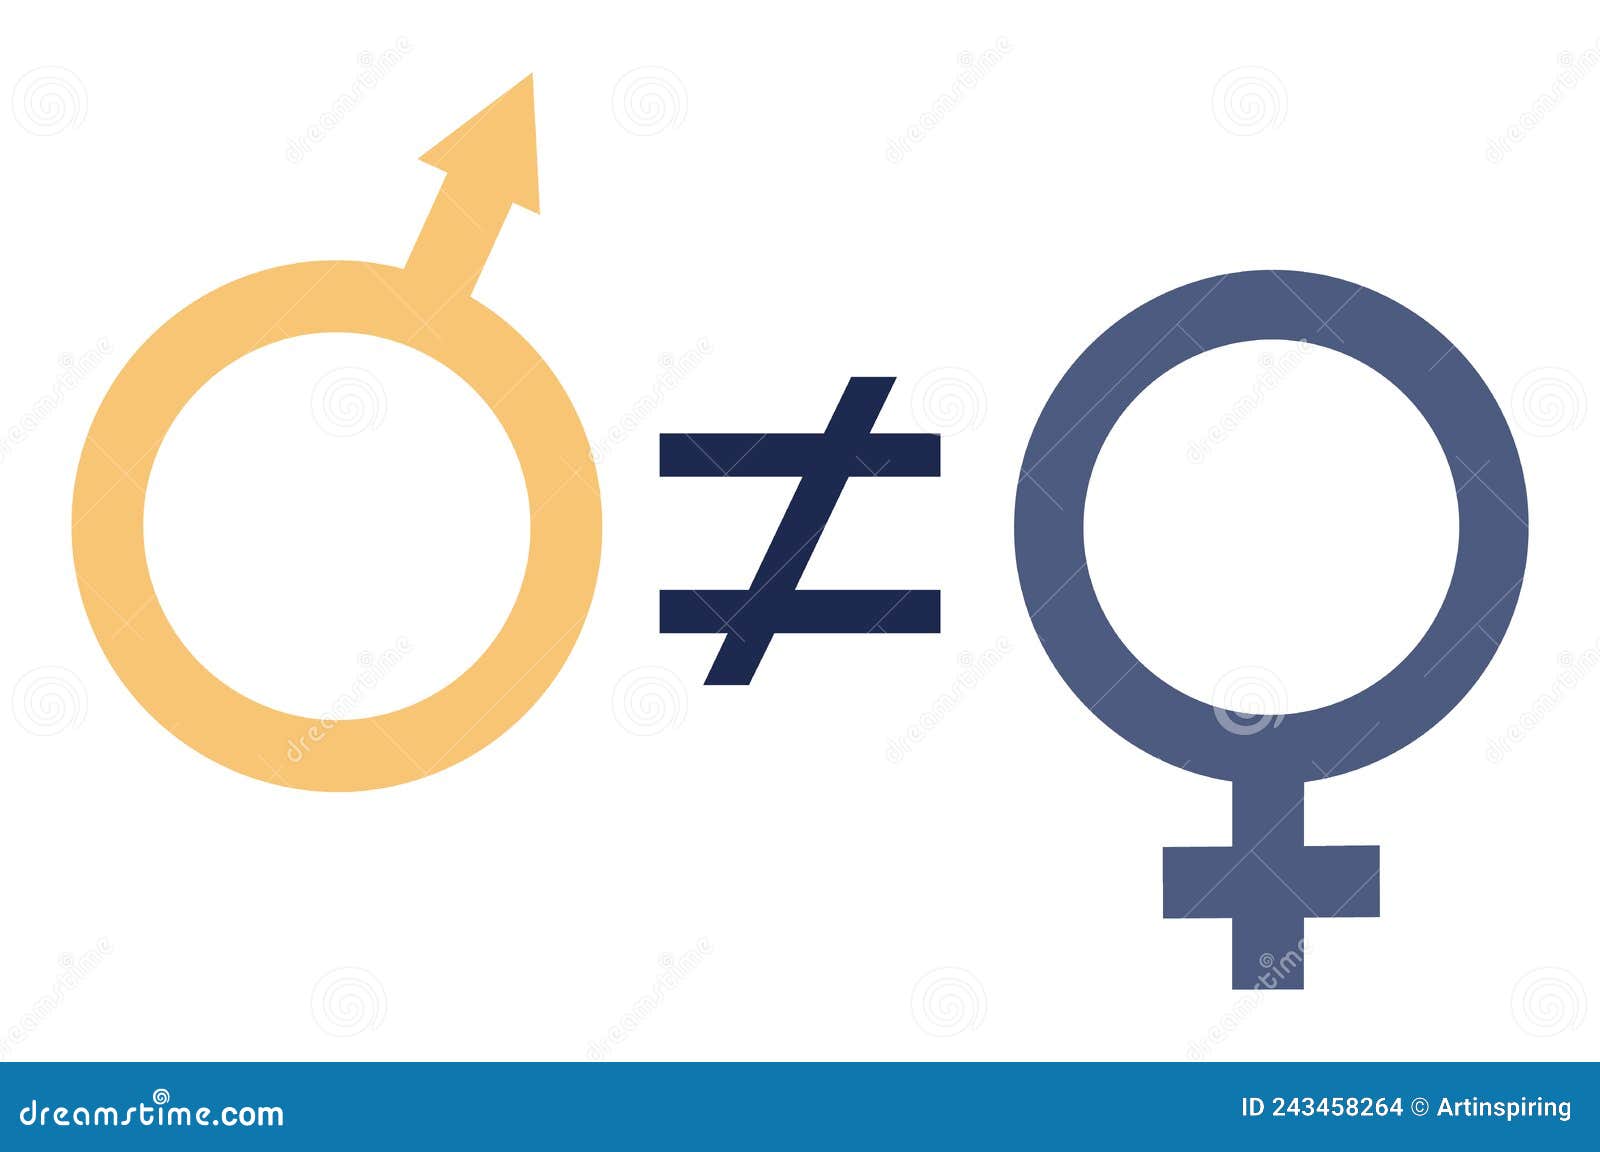 gender inequality concept. bias and sexism in workplace or social